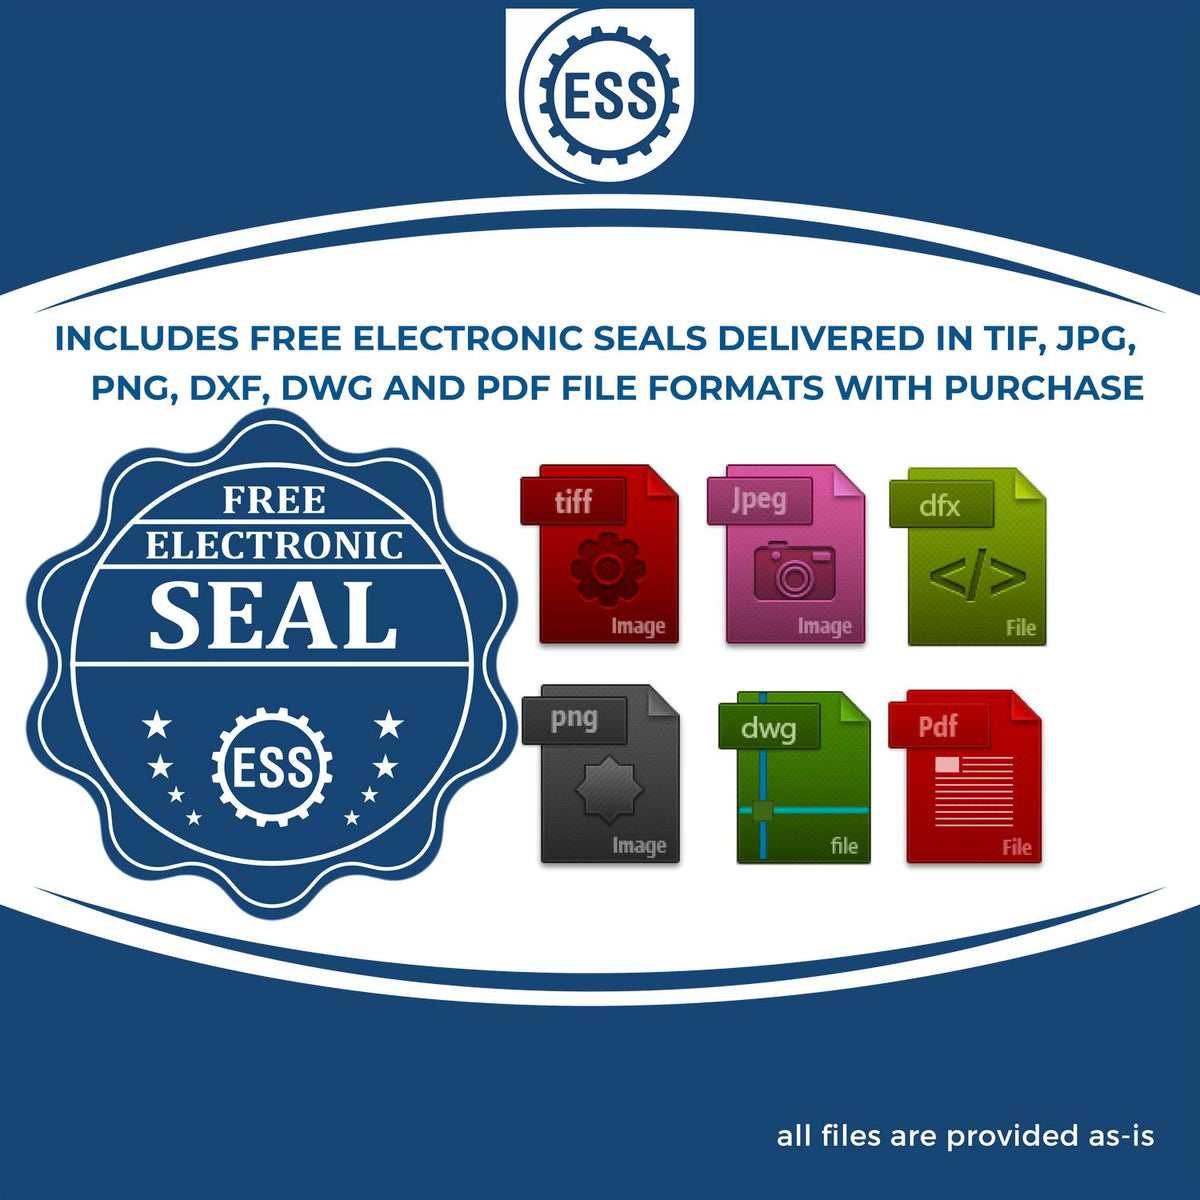 An infographic for the free electronic seal for the Slim Pre-Inked State Seal Notary Stamp for West Virginia illustrating the different file type icons such as DXF, DWG, TIF, JPG and PNG.